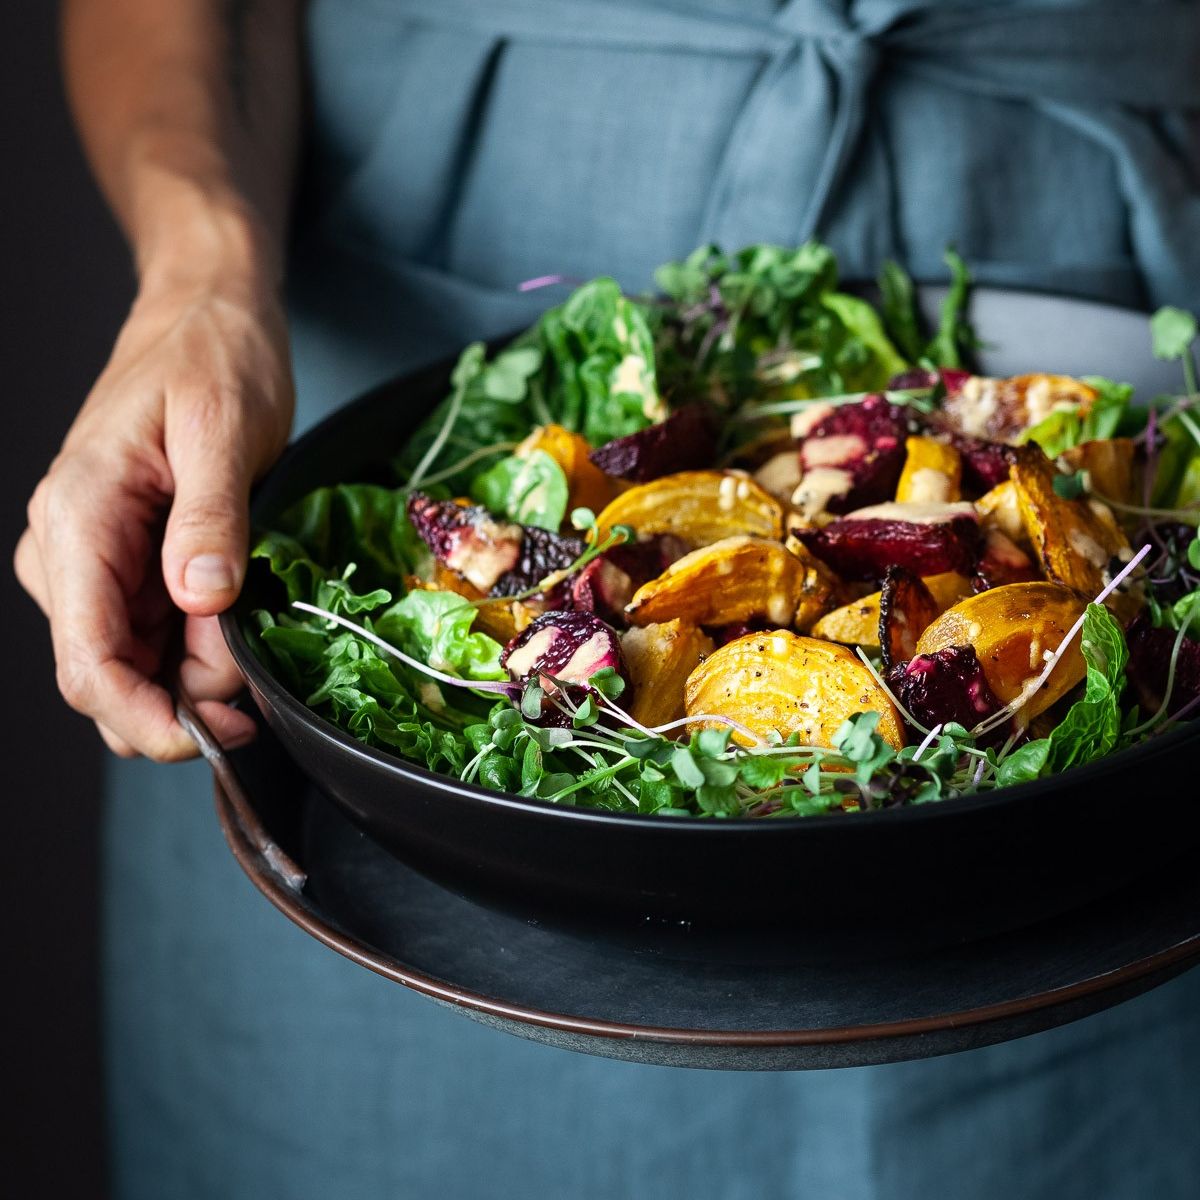 🧑‍🍳You Can't BEET this Salad

@the_simple_green's Roasted Beet Salad with Medjool Date Citrus Vinaigrette is divine on so many levels. 

Find the full recipe here:
thesimplegreen.com/roasted-beet-s….

📸Photo credit The Simple Green